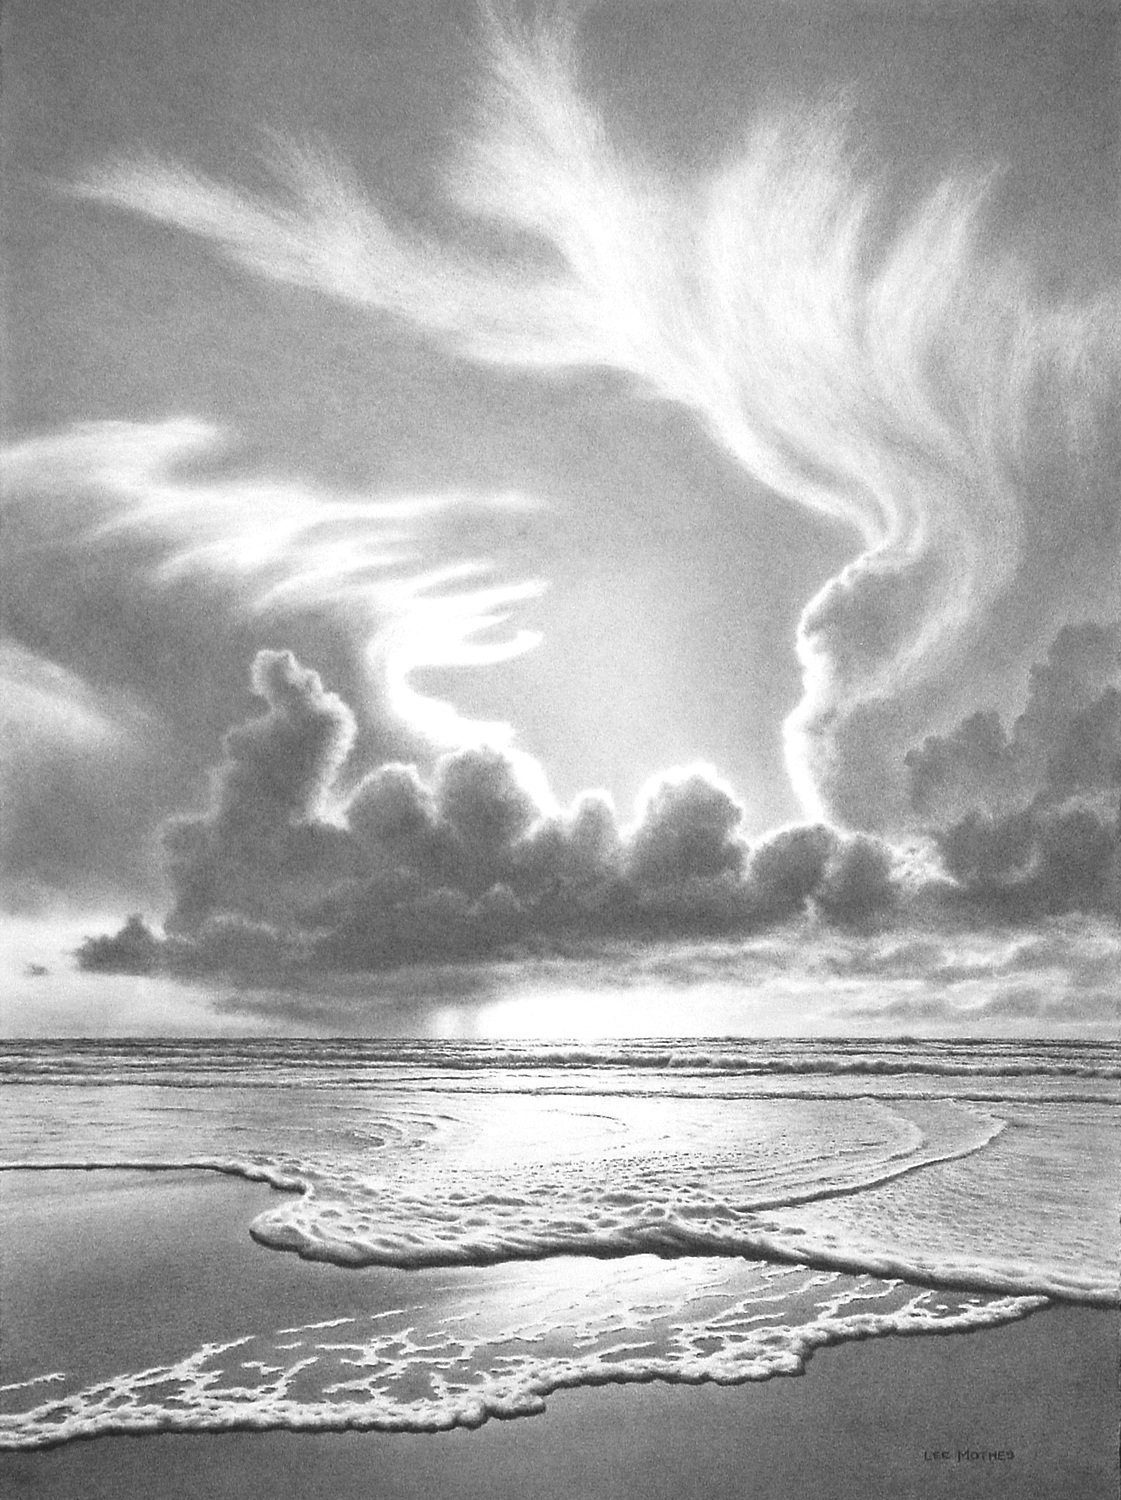 How to Draw Waves  A Realistic Ocean Wave Sketch in Pencil